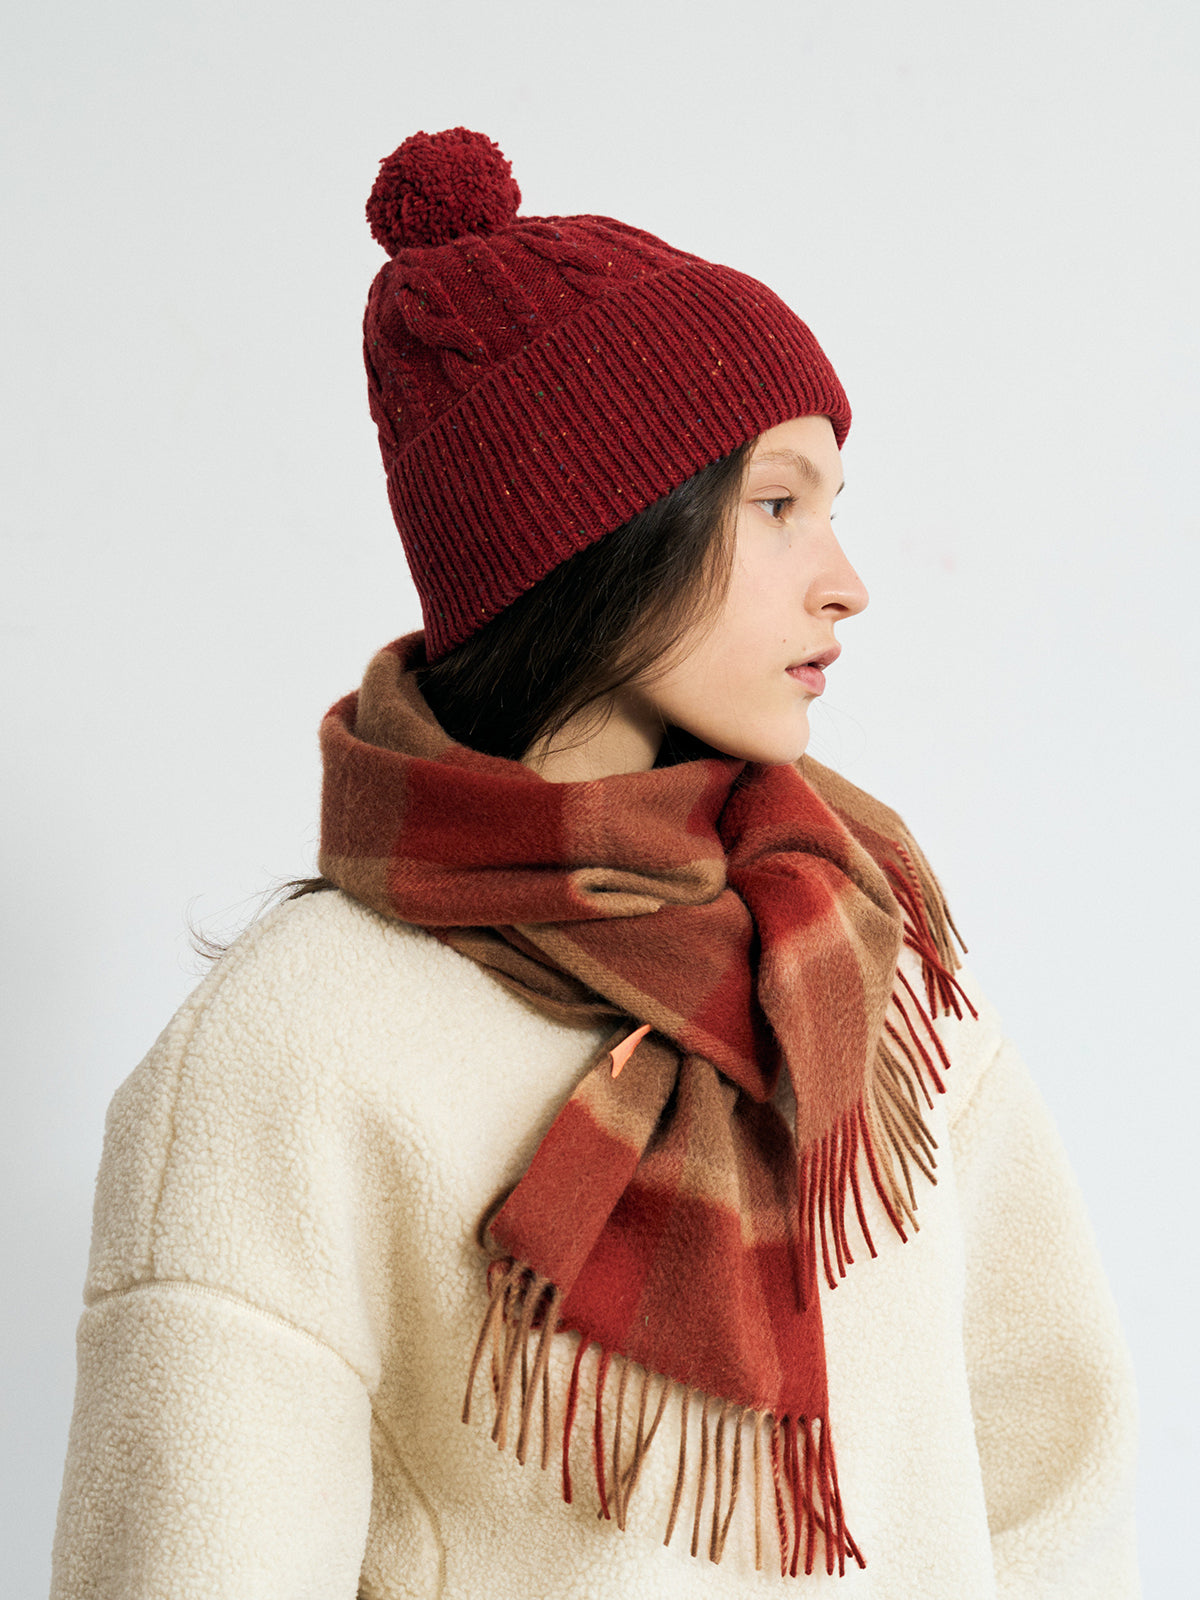 "Pom Pom" Cable Knit Wool Beanie Hat - Wine Red - LOST PATTERN Cashmere